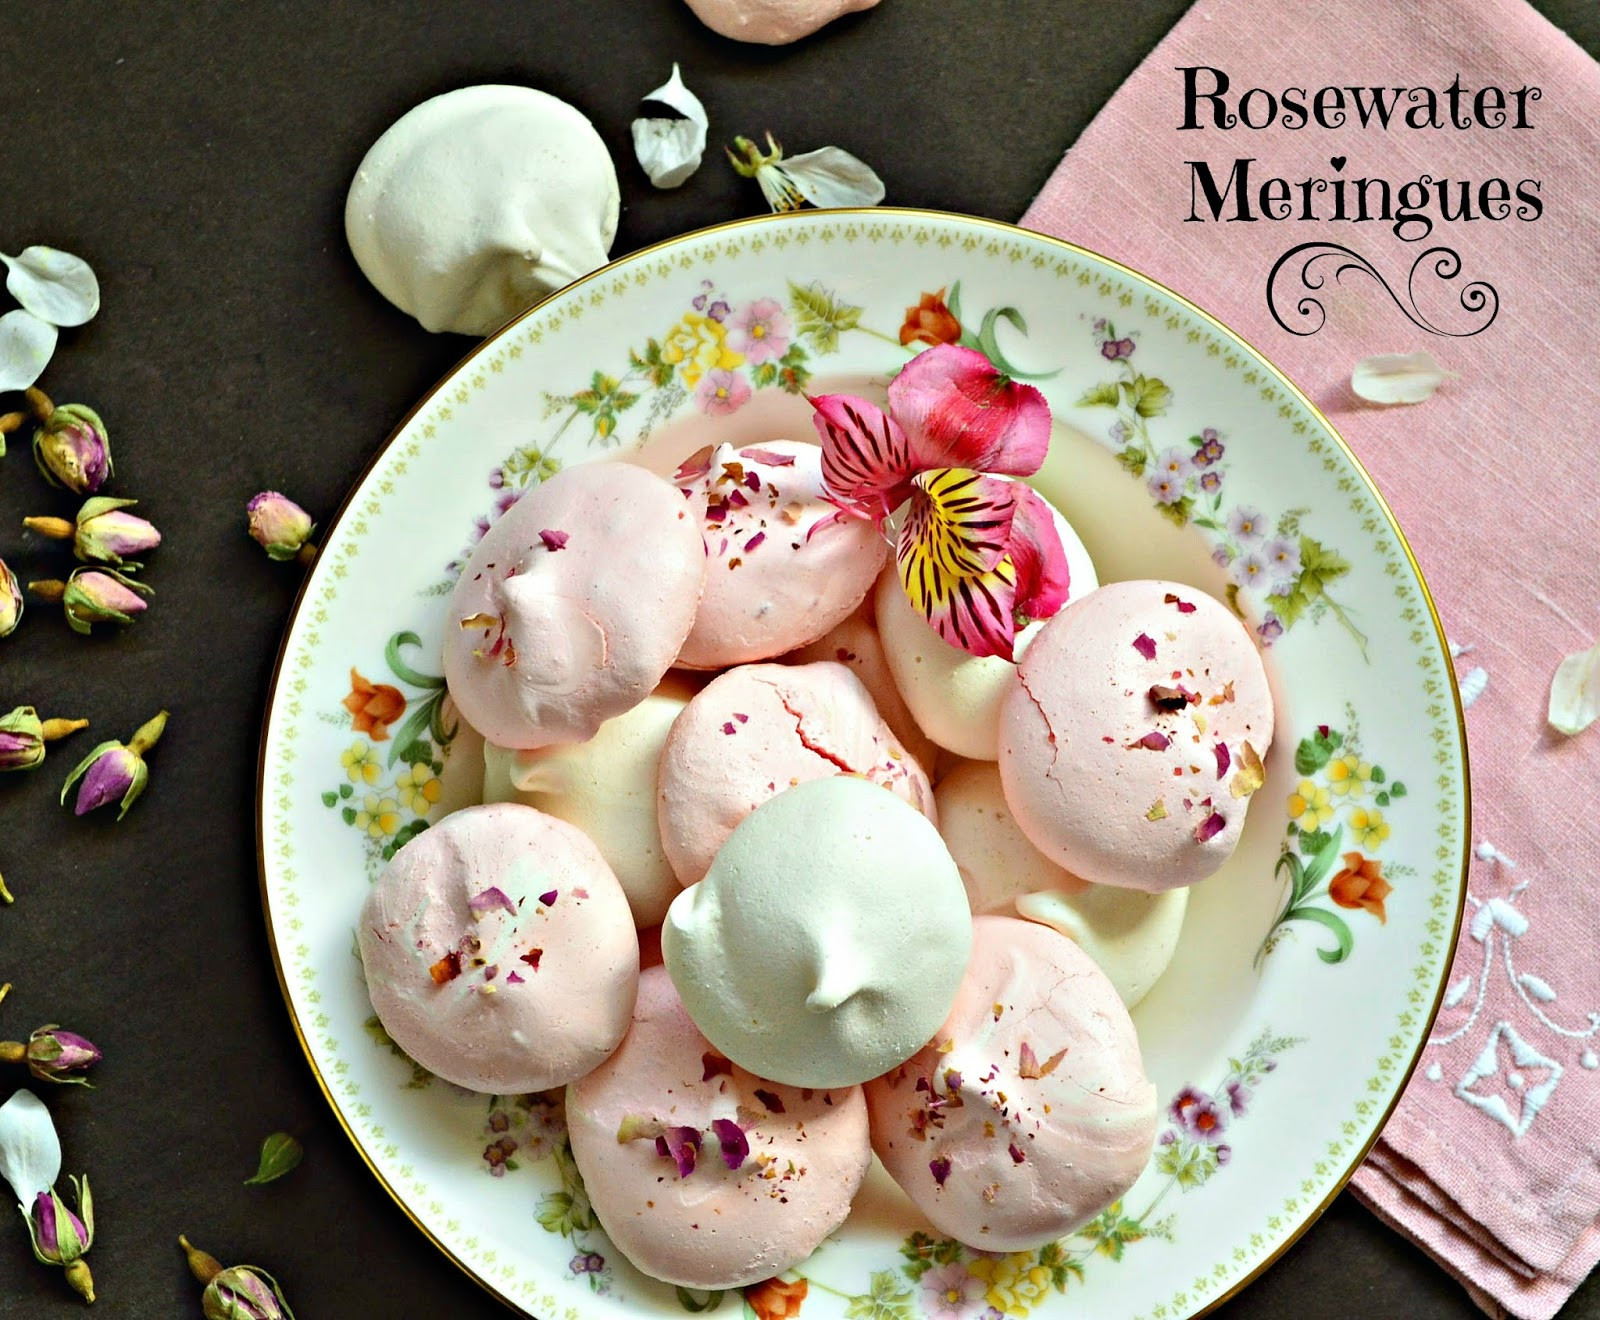 Passover Meringue Cookies
 This is How I Cook How to Make Rosewater Meringues